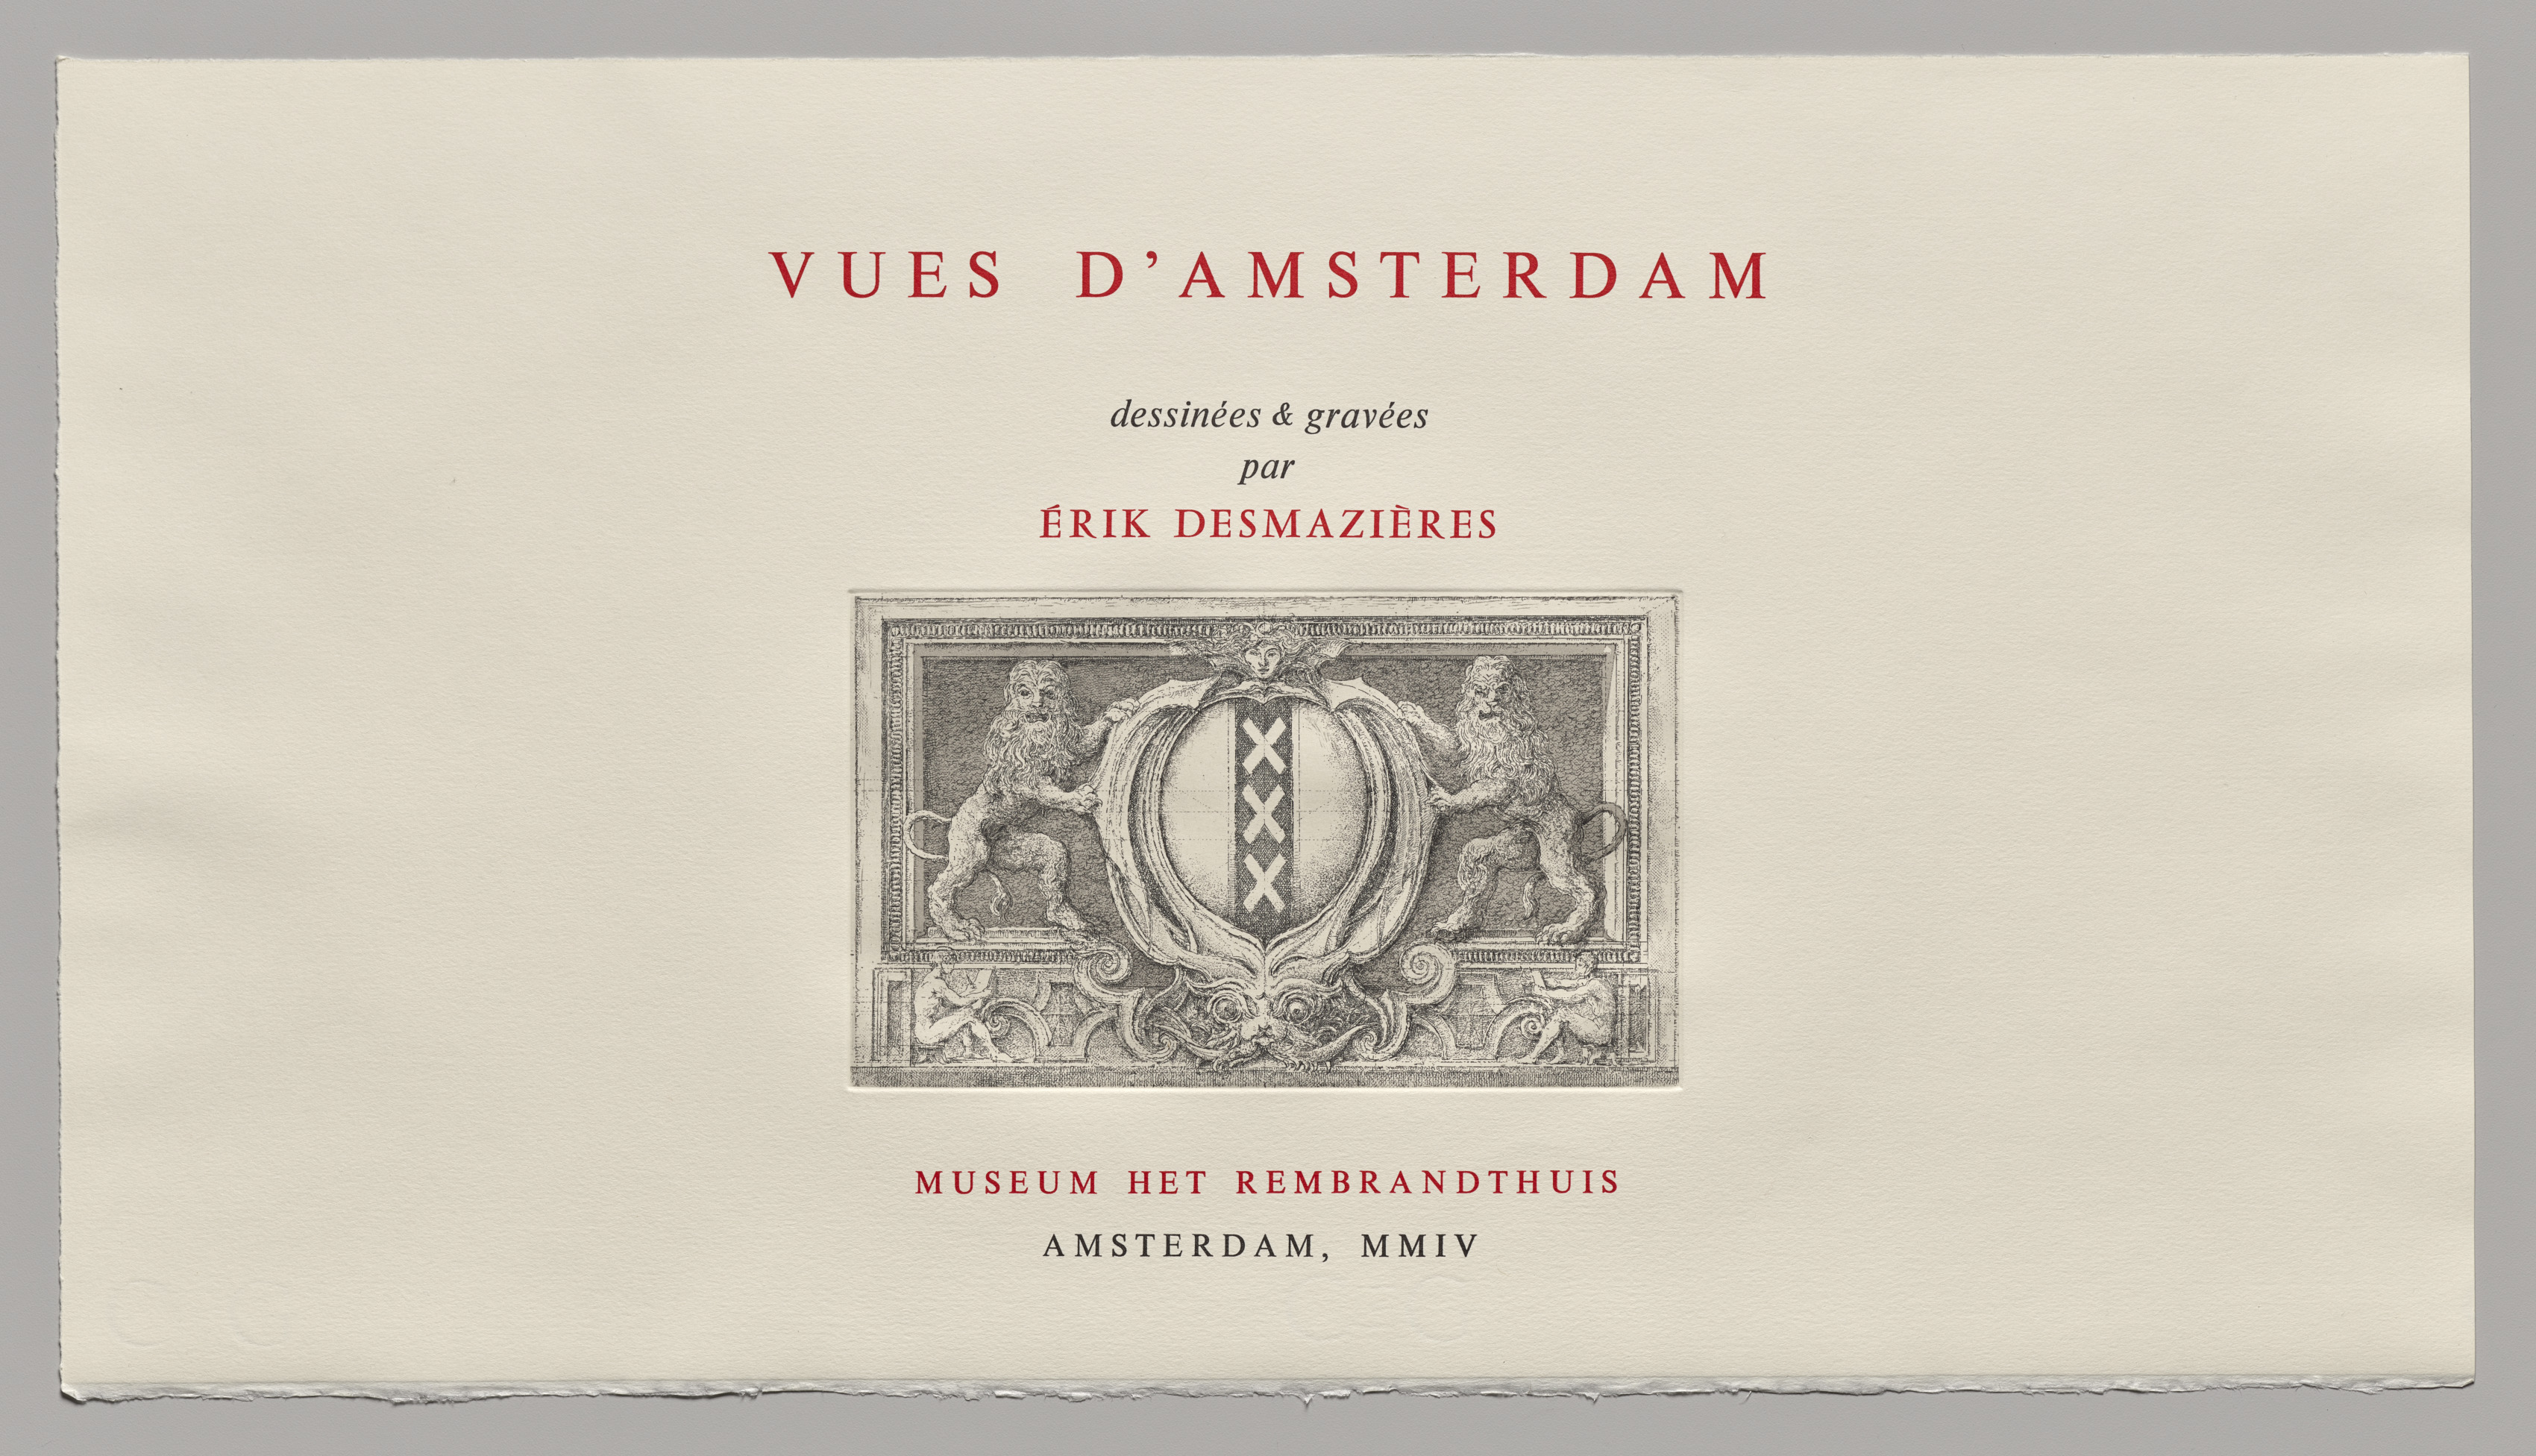 Views of Amsterdam: Cartouche on Title Page